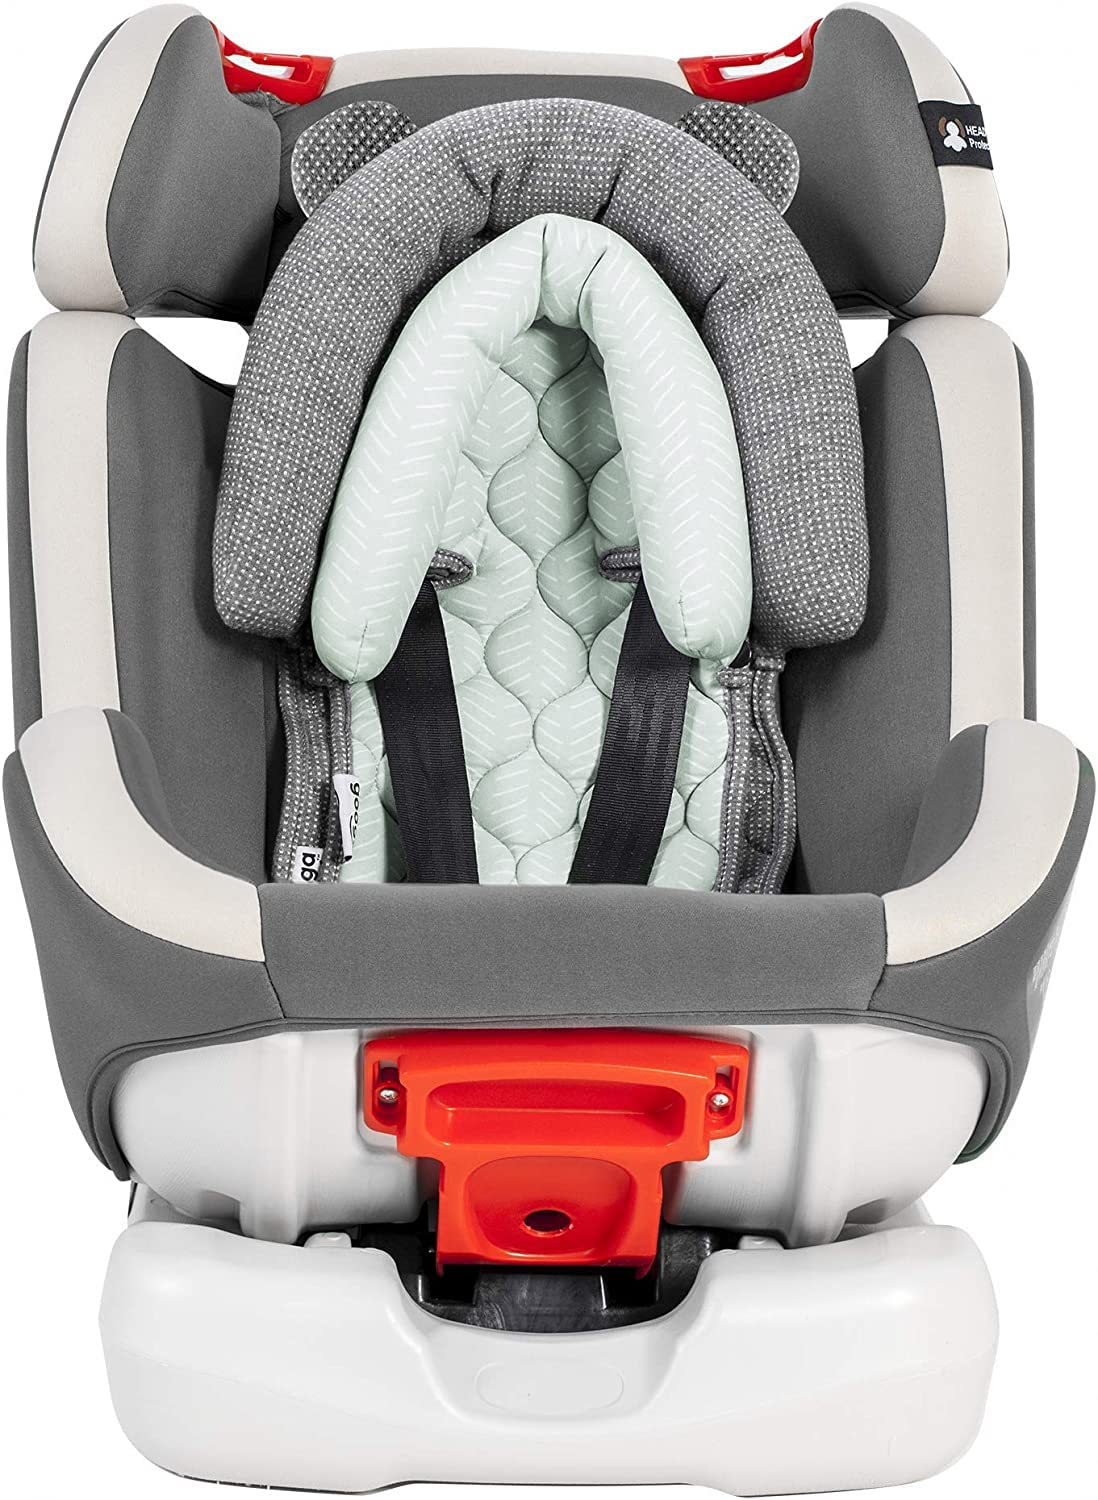 GOOGA 2-in-1 Baby Head Neck Body Support Cushion Pad for Newborn Infant Toddler-Soft Car Seat Insert Cushion Pad, Perfect for Strollers, Baby Swing, Carriers, Best Gift Choice for Baby Shower